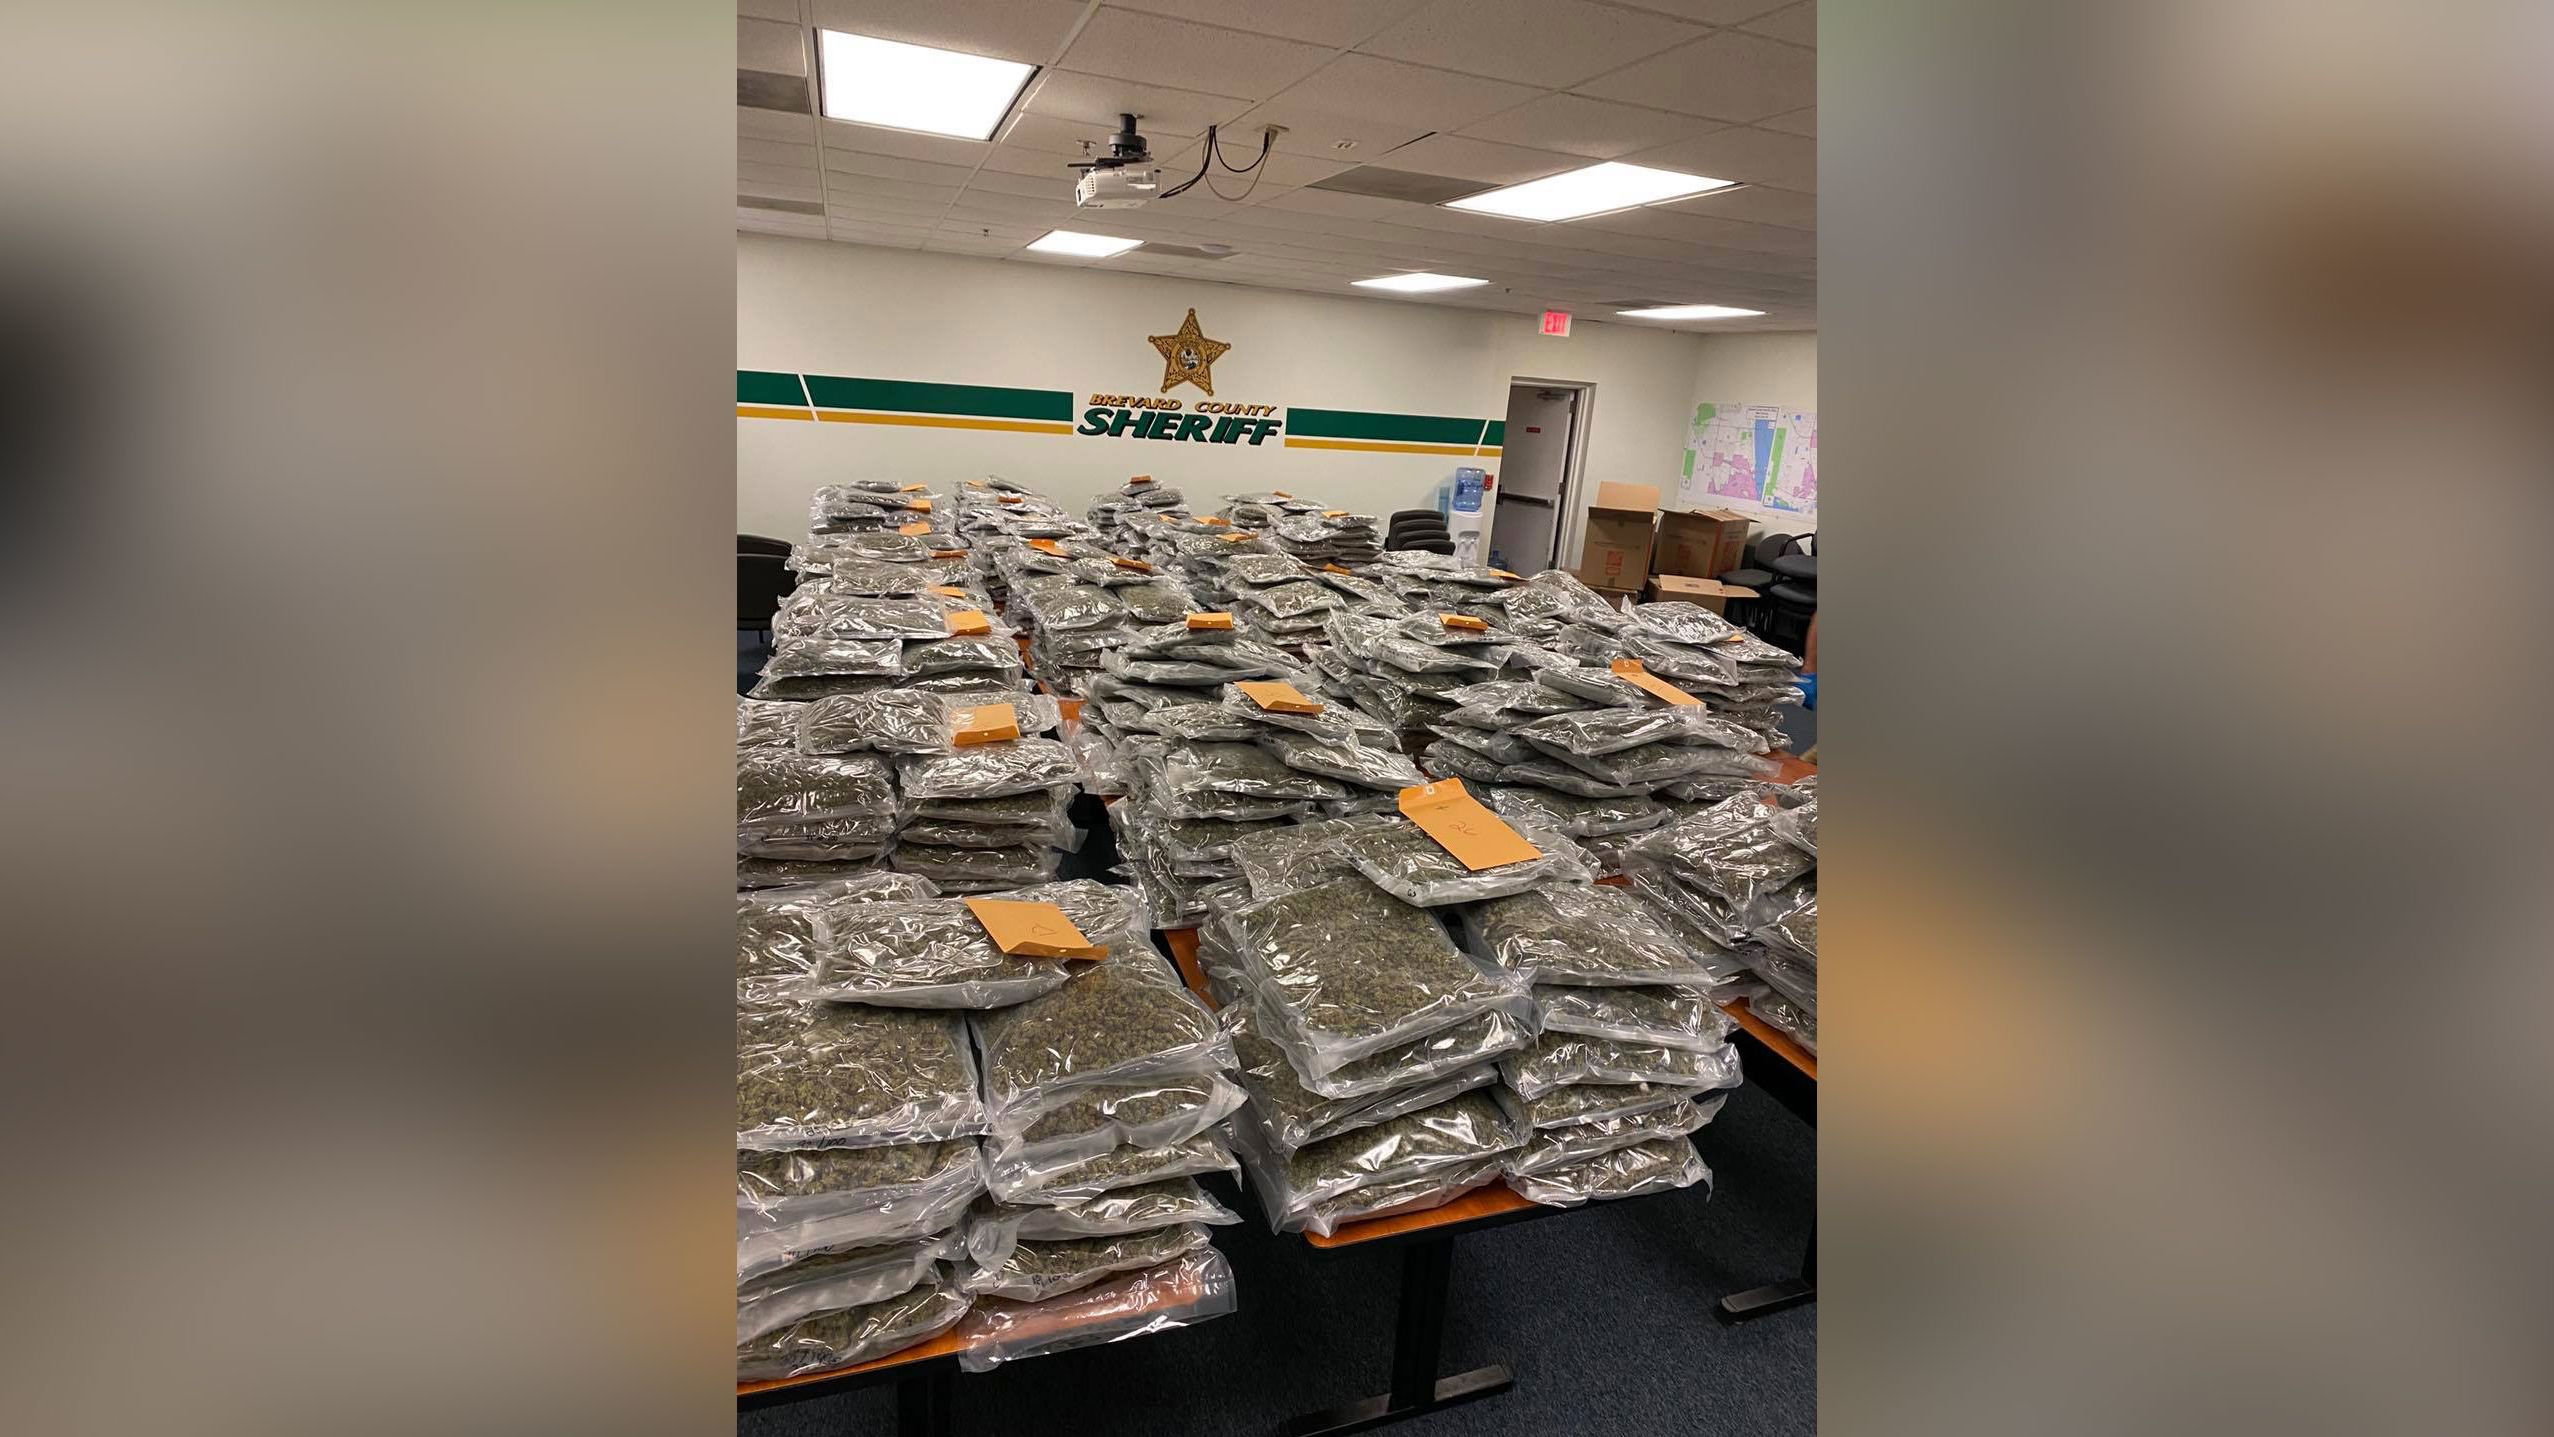 About 770 pounds of "high grade marijuana" was found in a mini-storage facility in Viera, Florida. The Brevard County Sheriff's Office is now looking for the "rightful owner." 